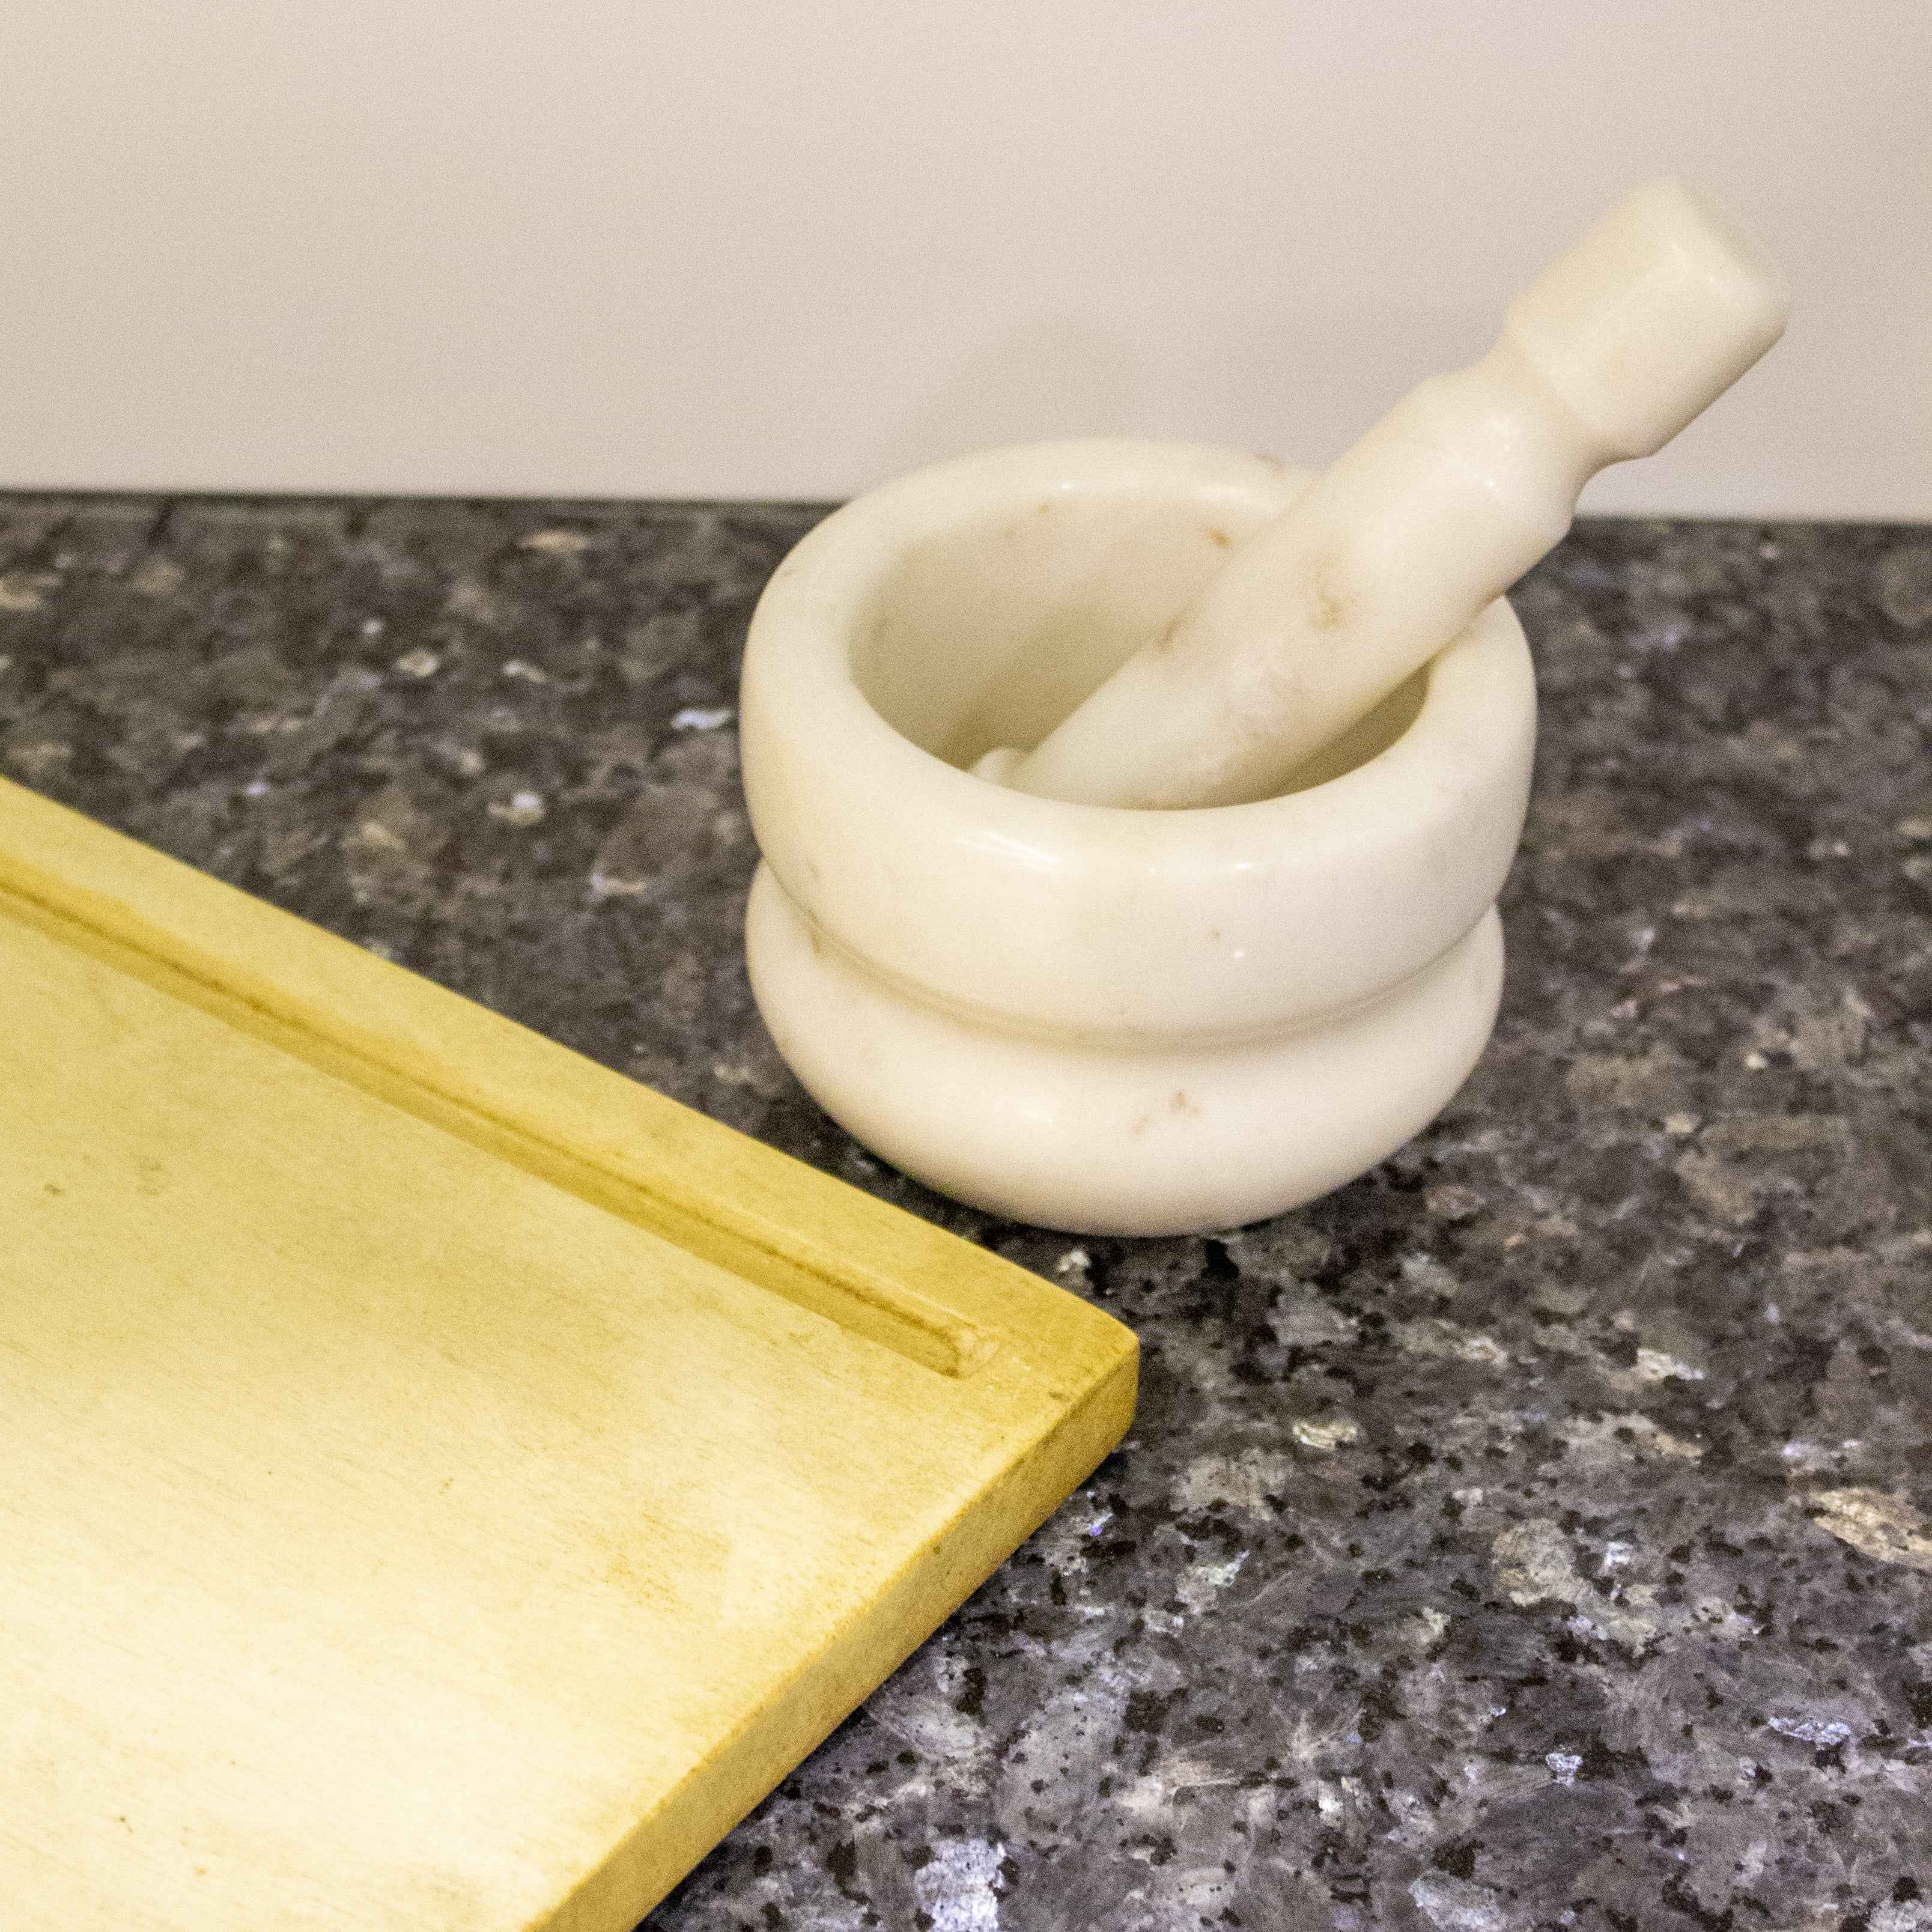 Concentric Mortar and Pestle